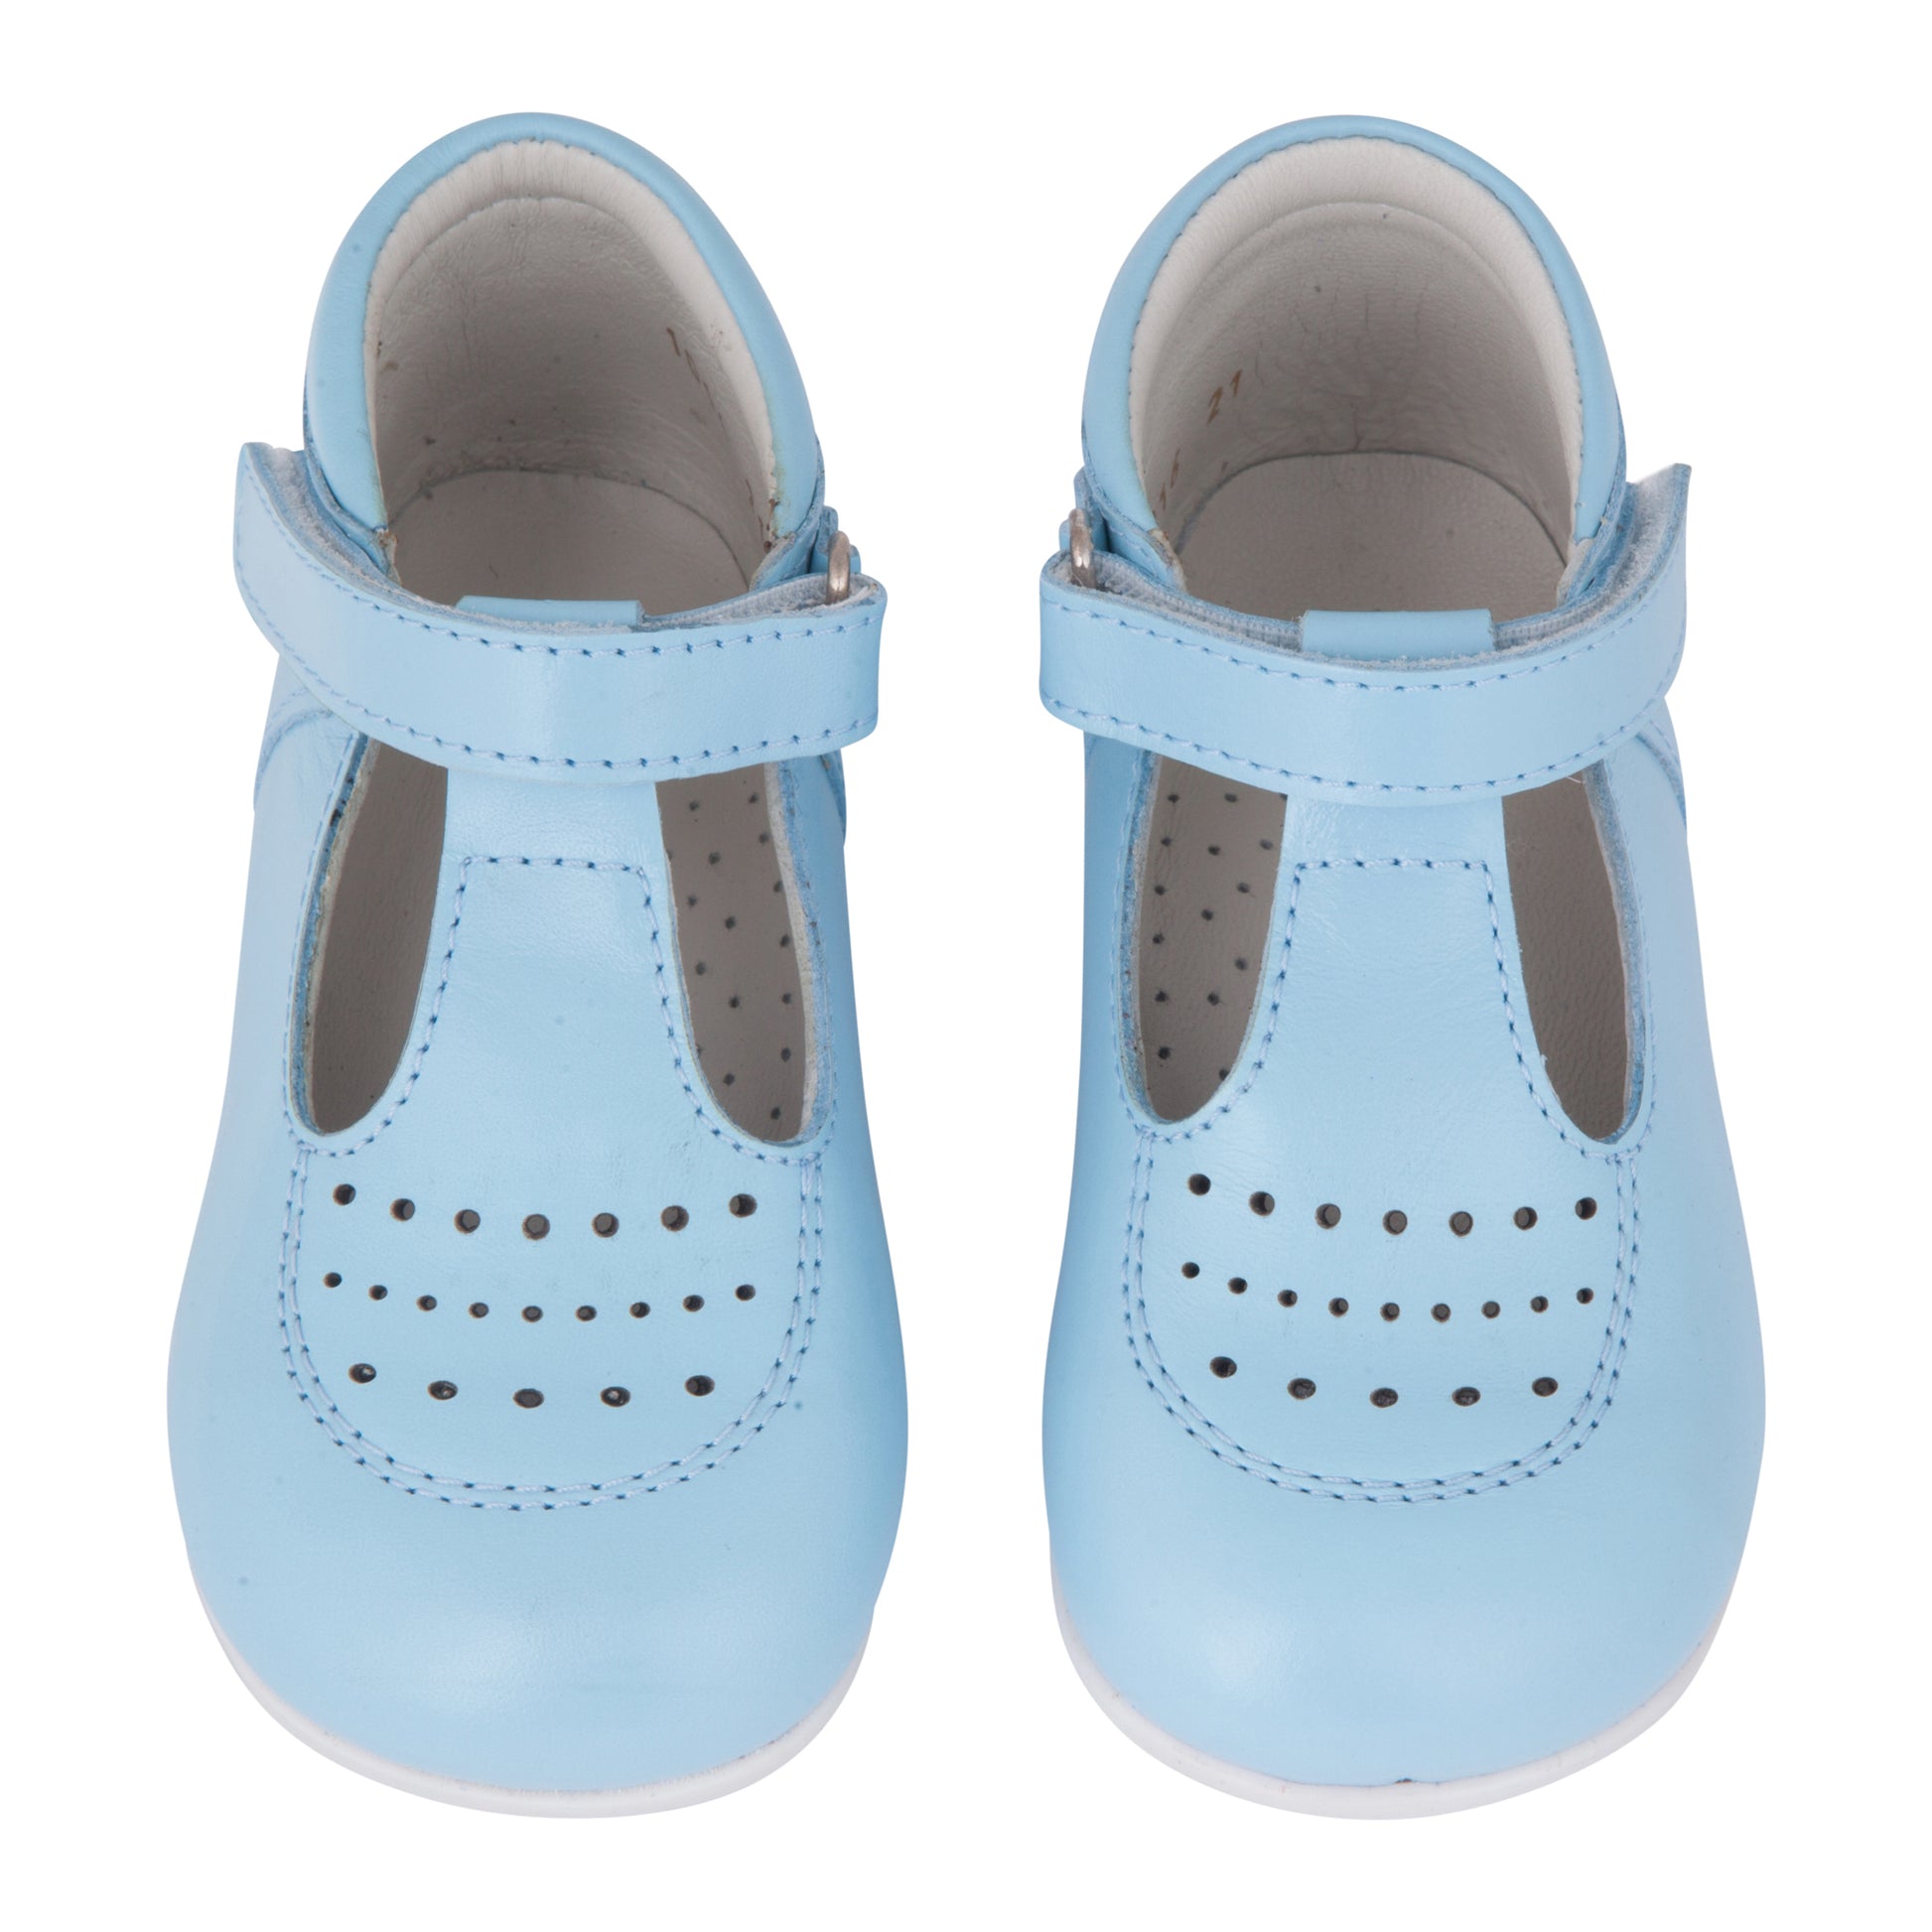 children shoes for royalties 